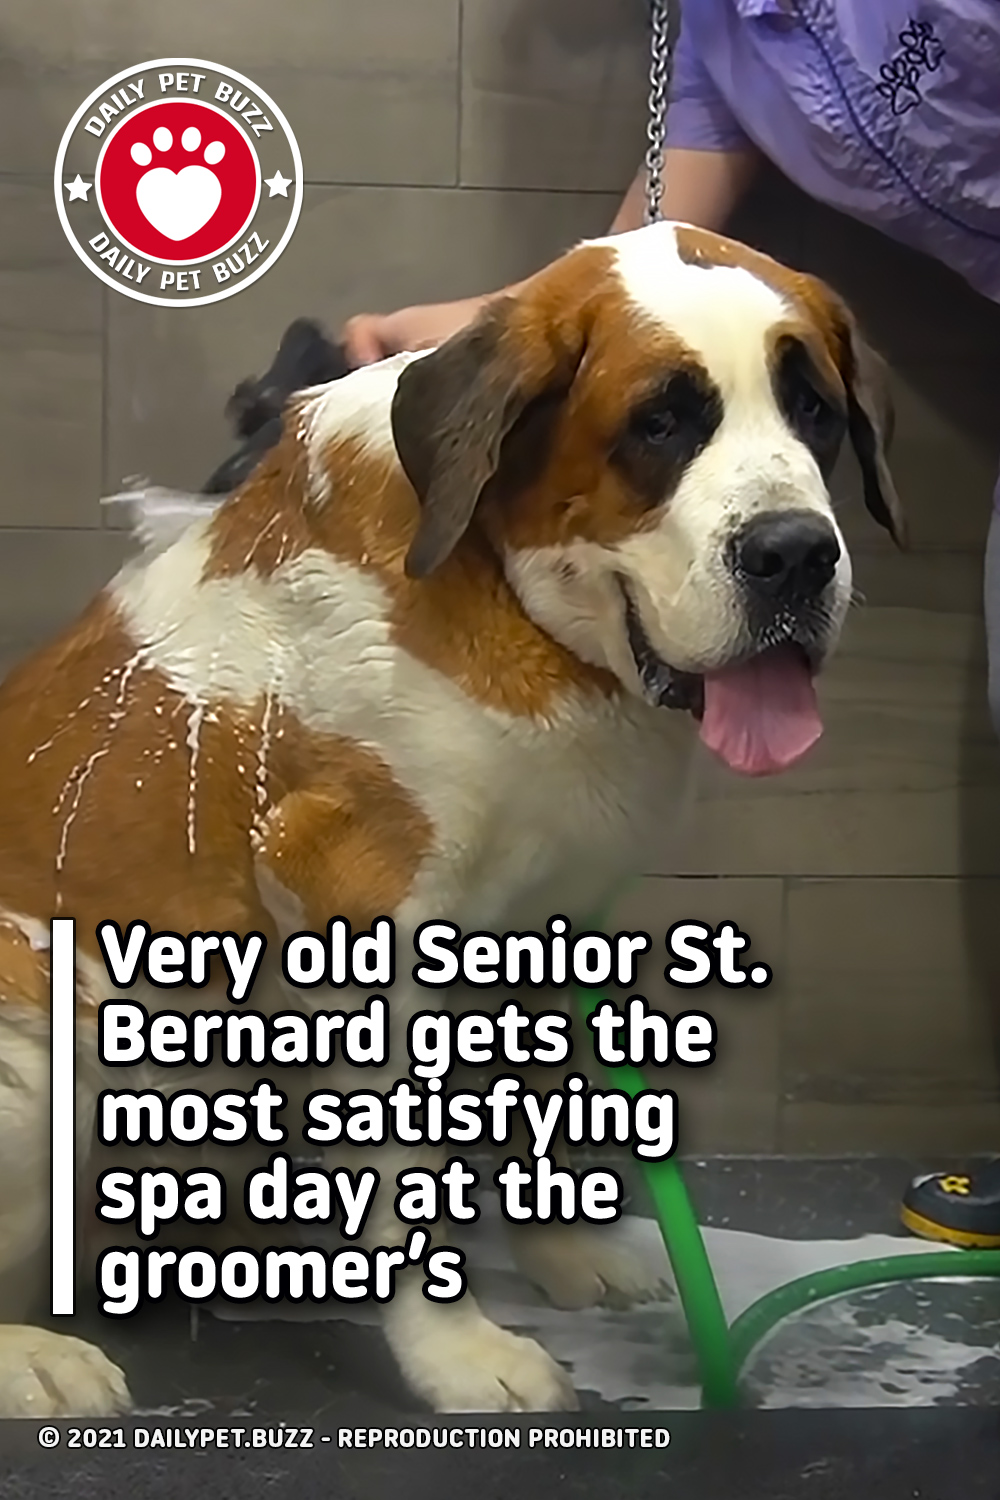 Very old Senior St. Bernard gets the most satisfying spa day at the groomer’s